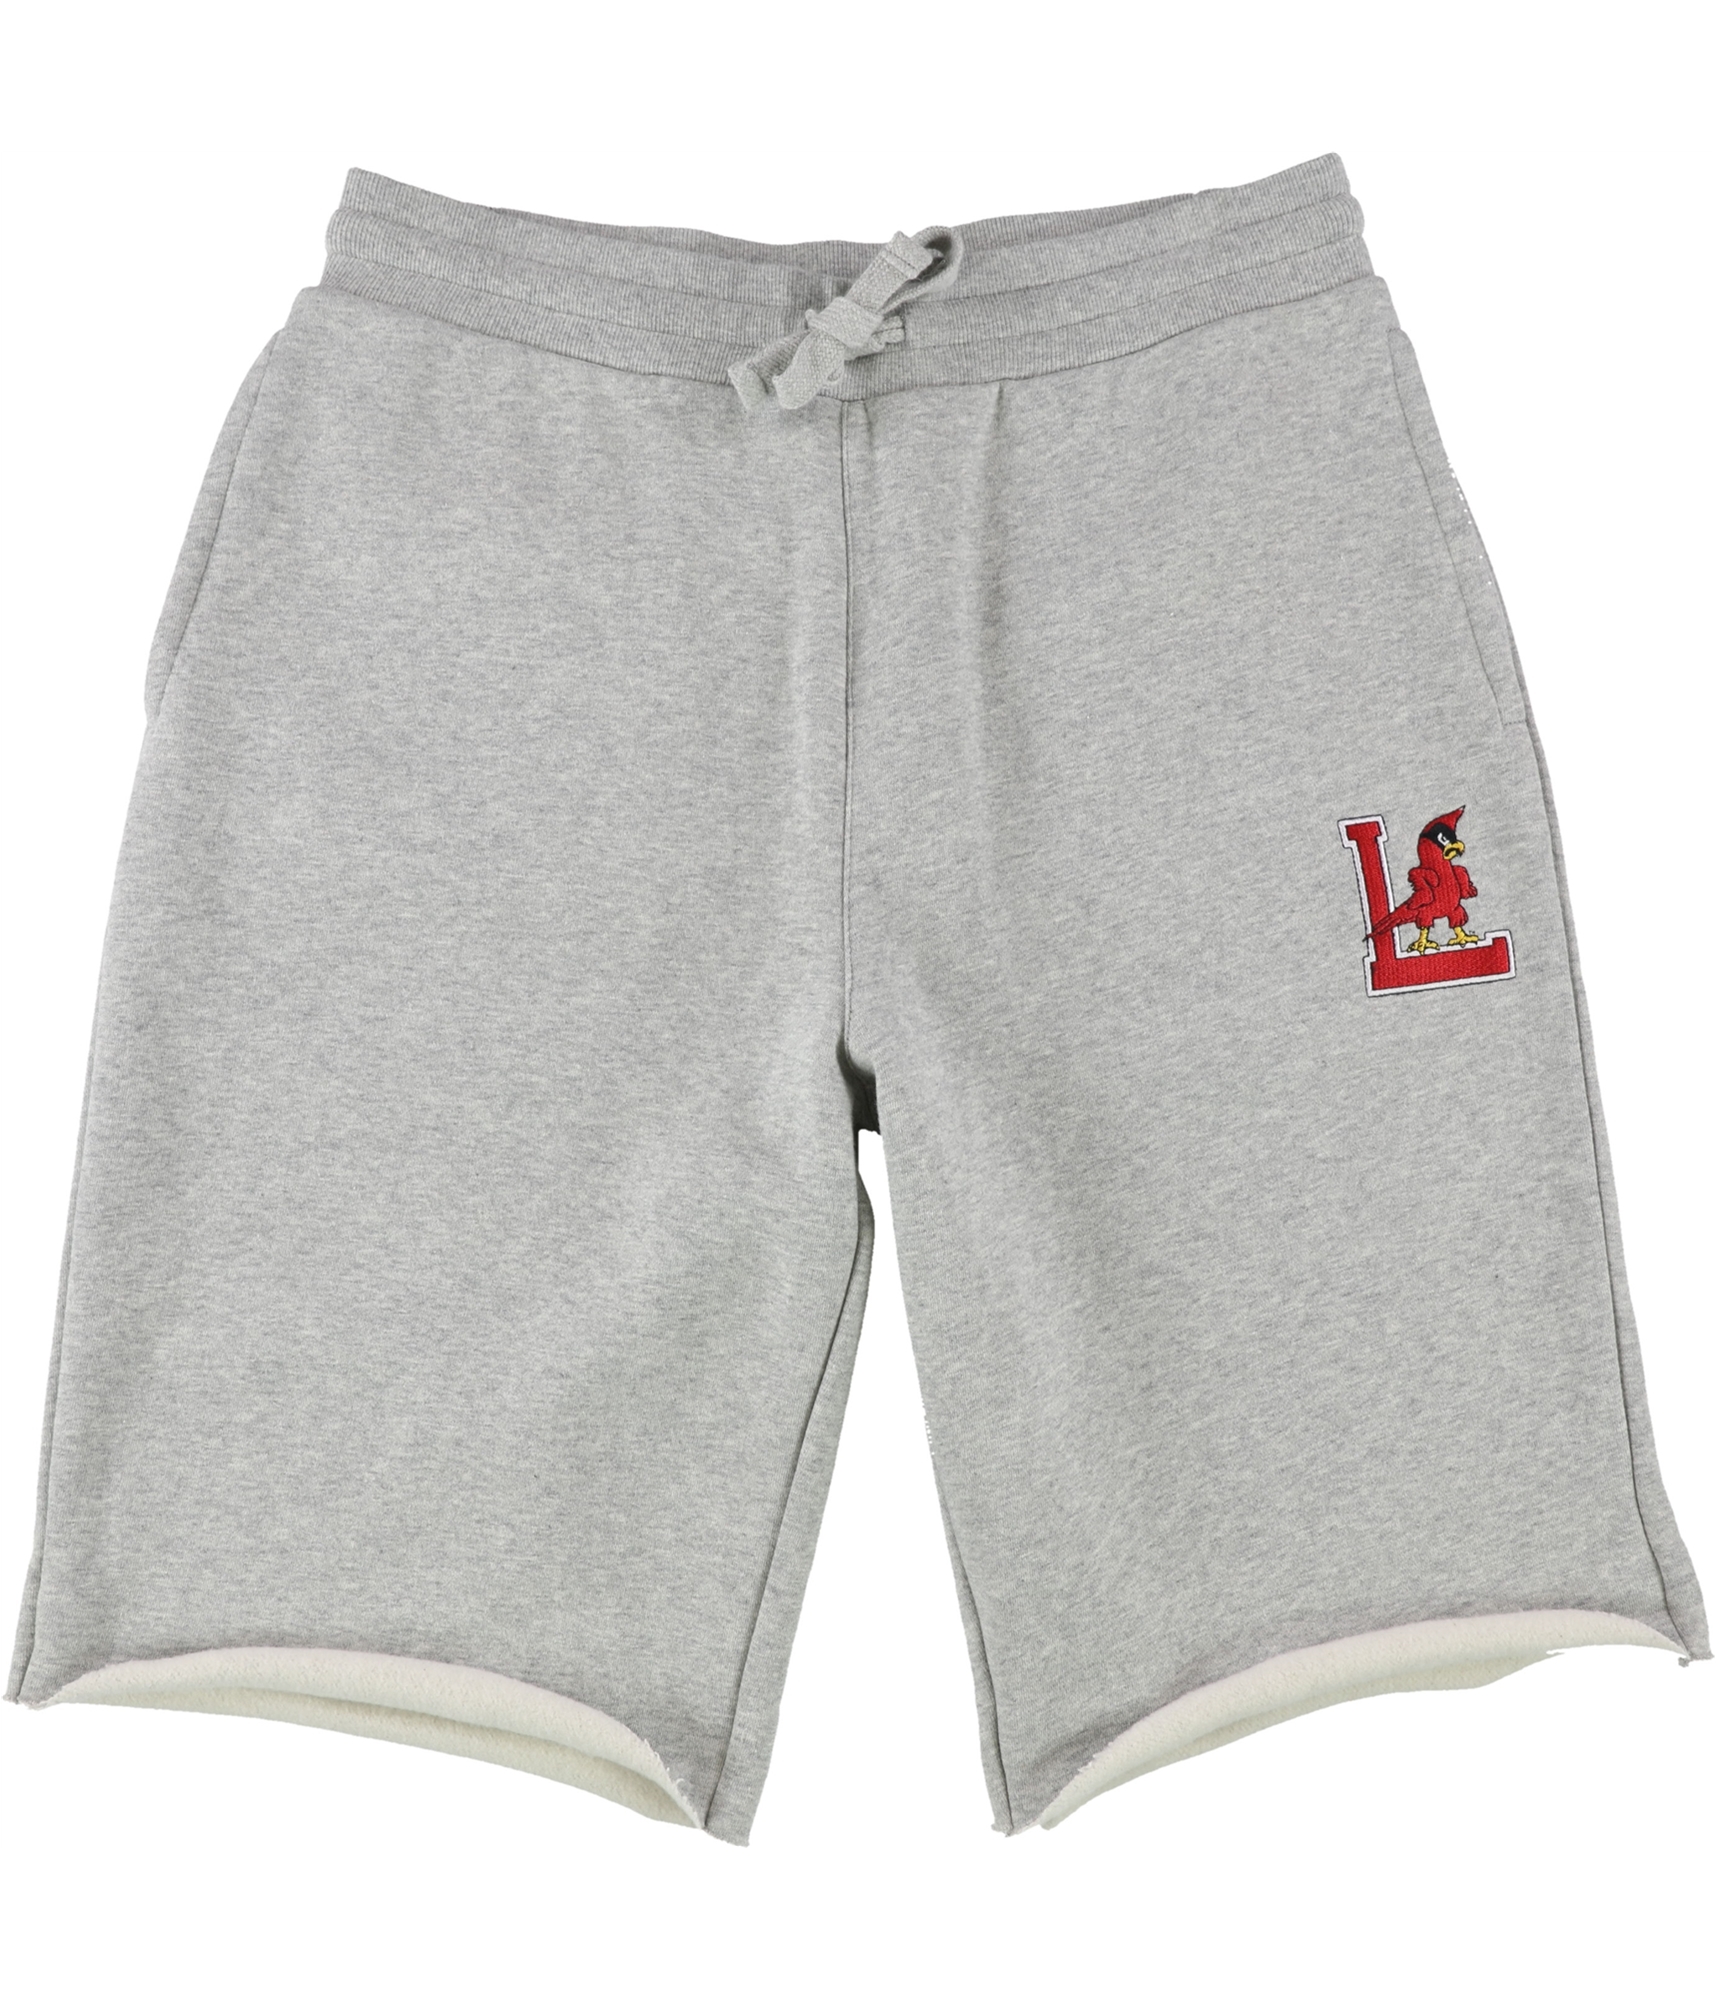 MENS LOUISVILLE CARDINAL SMALL SLEEP PANTS-NEW WITH TAGS-SEE DESCRIPTION